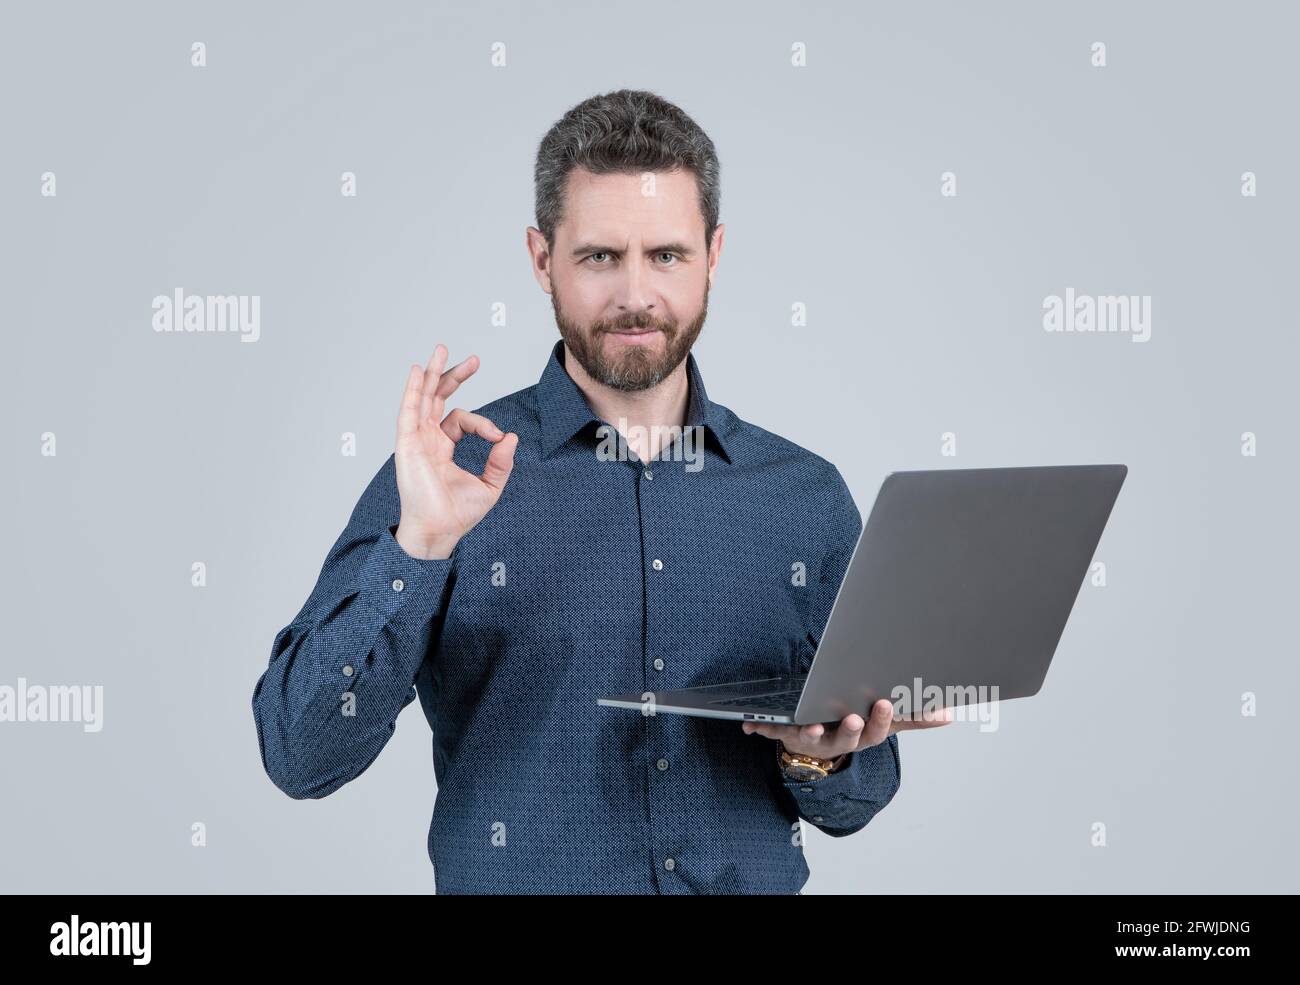 Computer programmer show ring gesture holding portable laptop grey background, OK Stock Photo